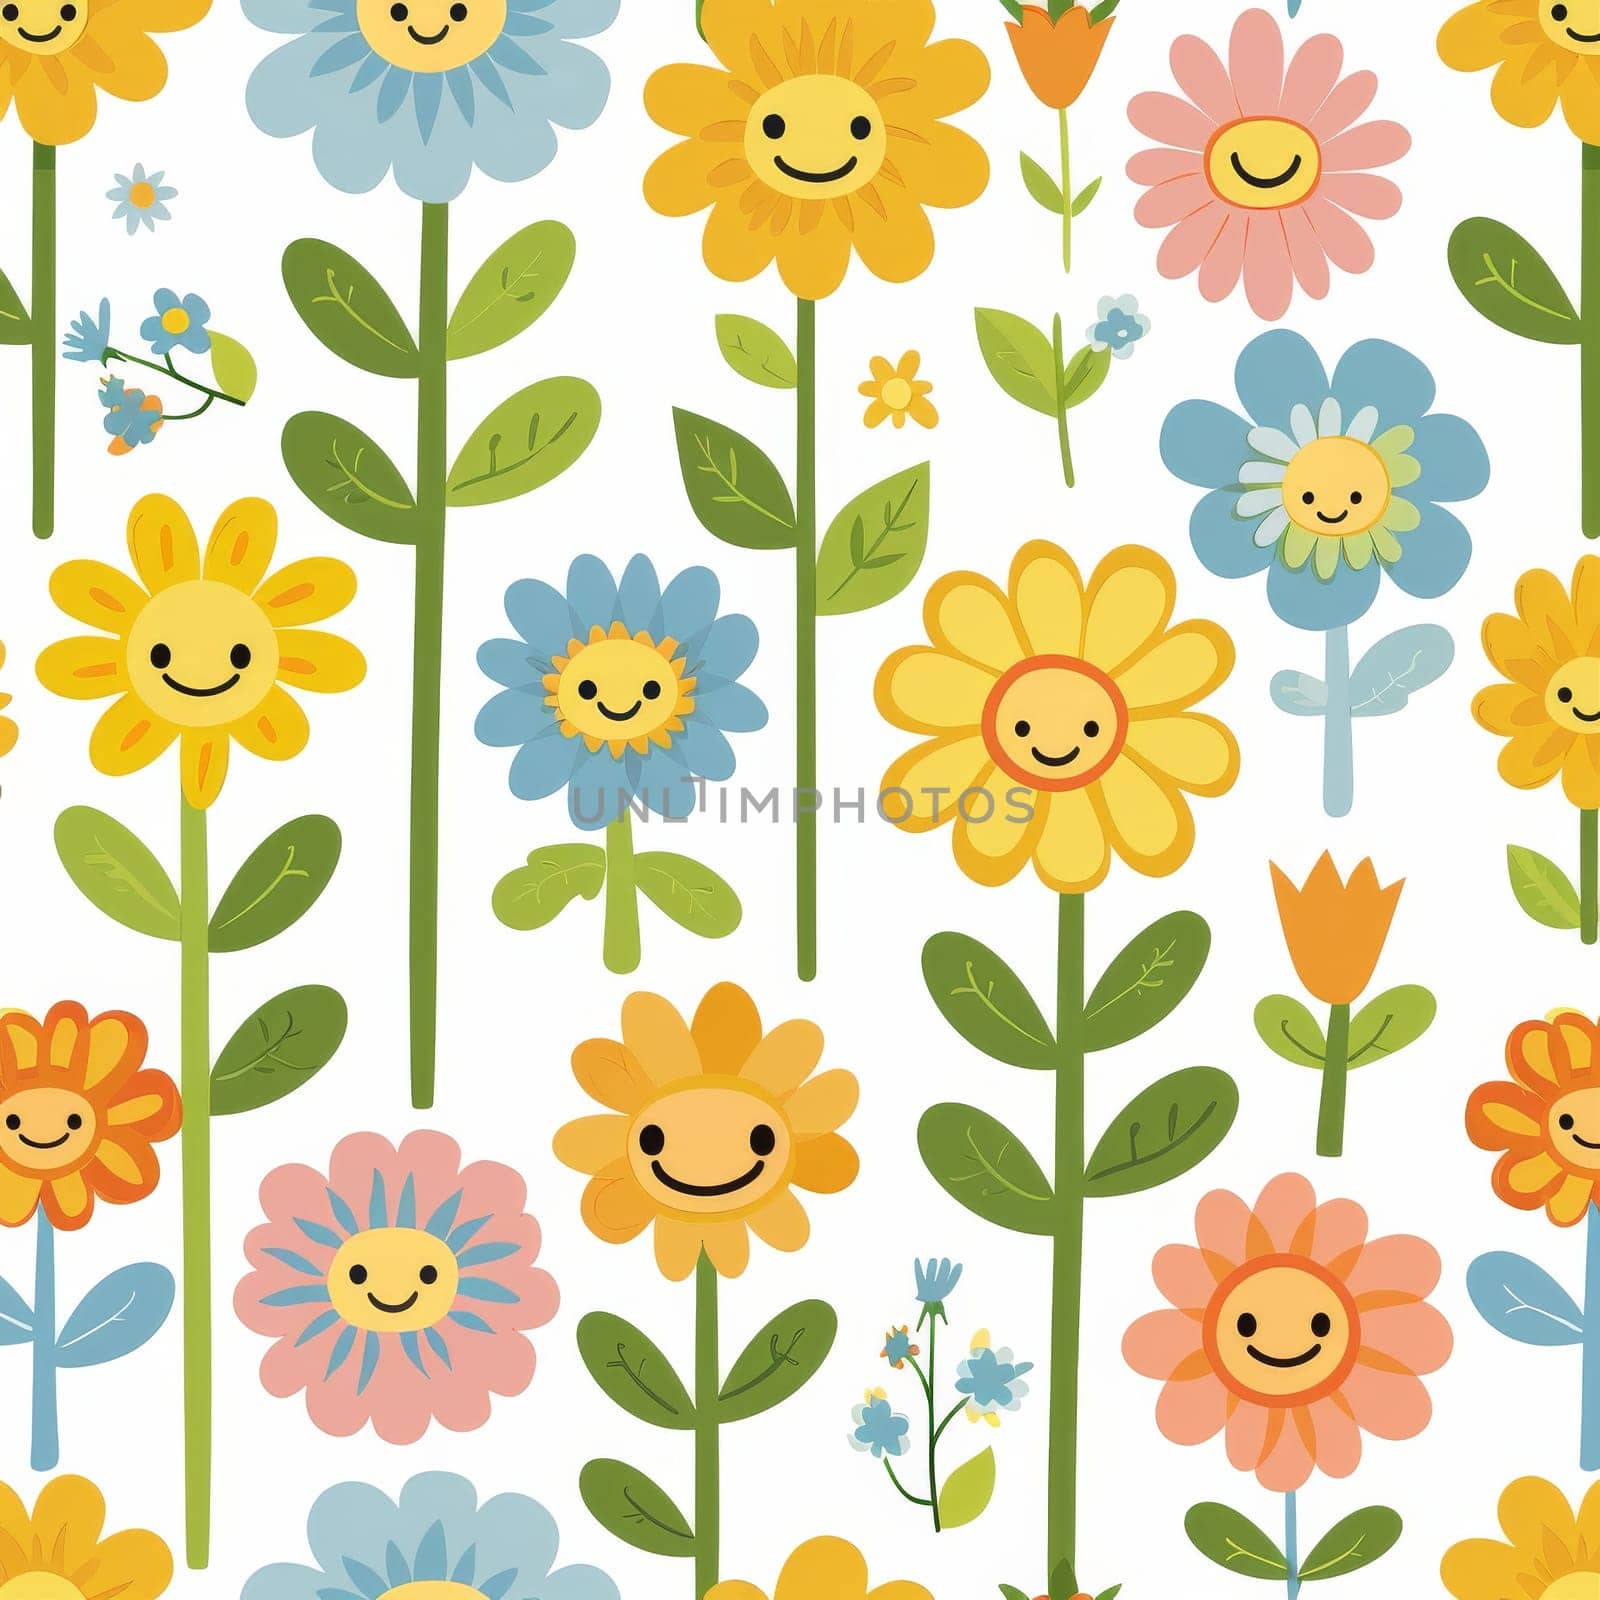 A colorful flower pattern with cartoon faces on them. The flowers are arranged in a way that they look like they are smiling. Scene is cheerful and happy